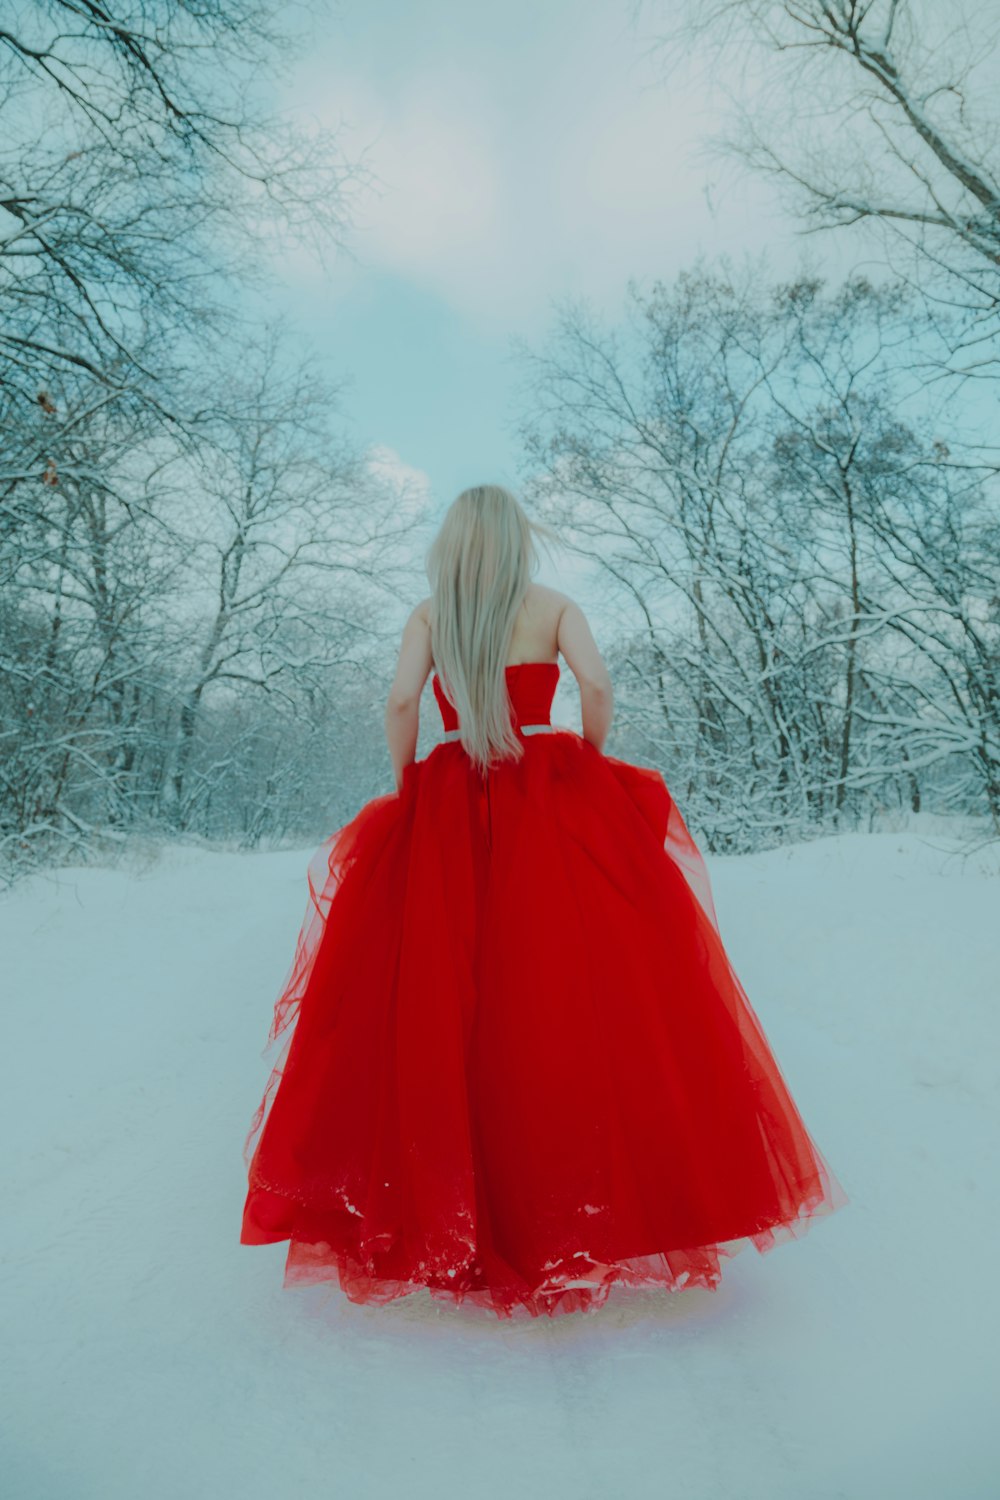 woman in red dress standing on snow covered ground during daytime